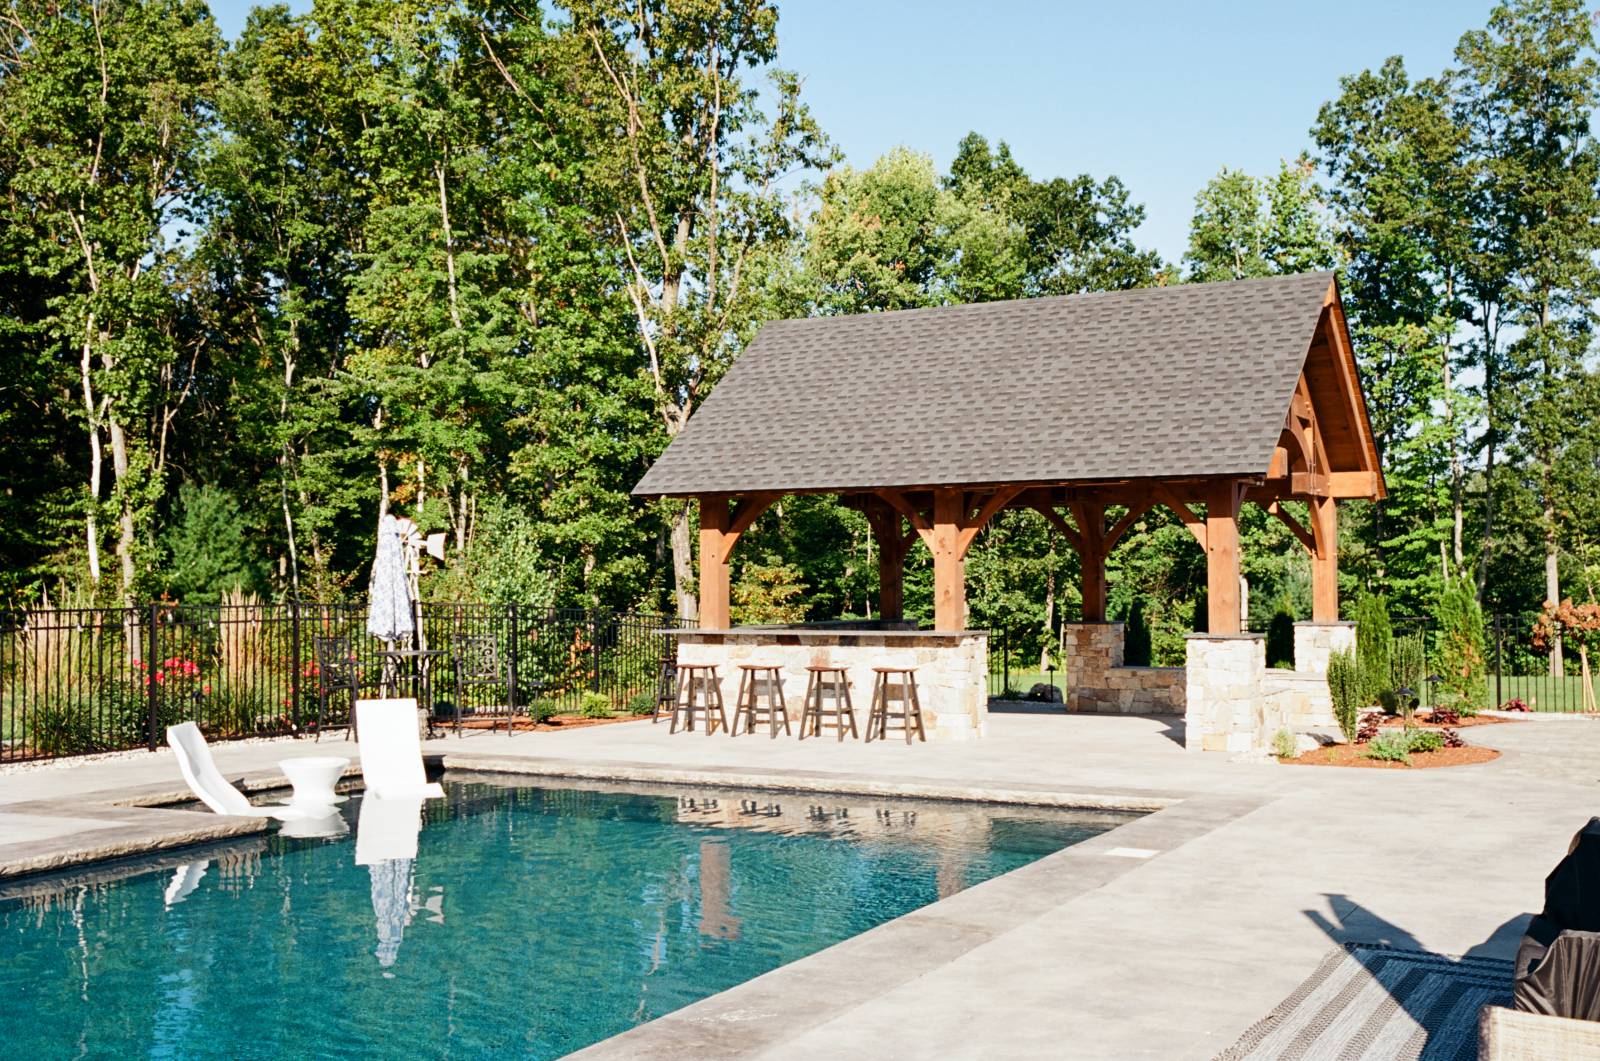 Alpine Timber Frame Pavilion By The Pool